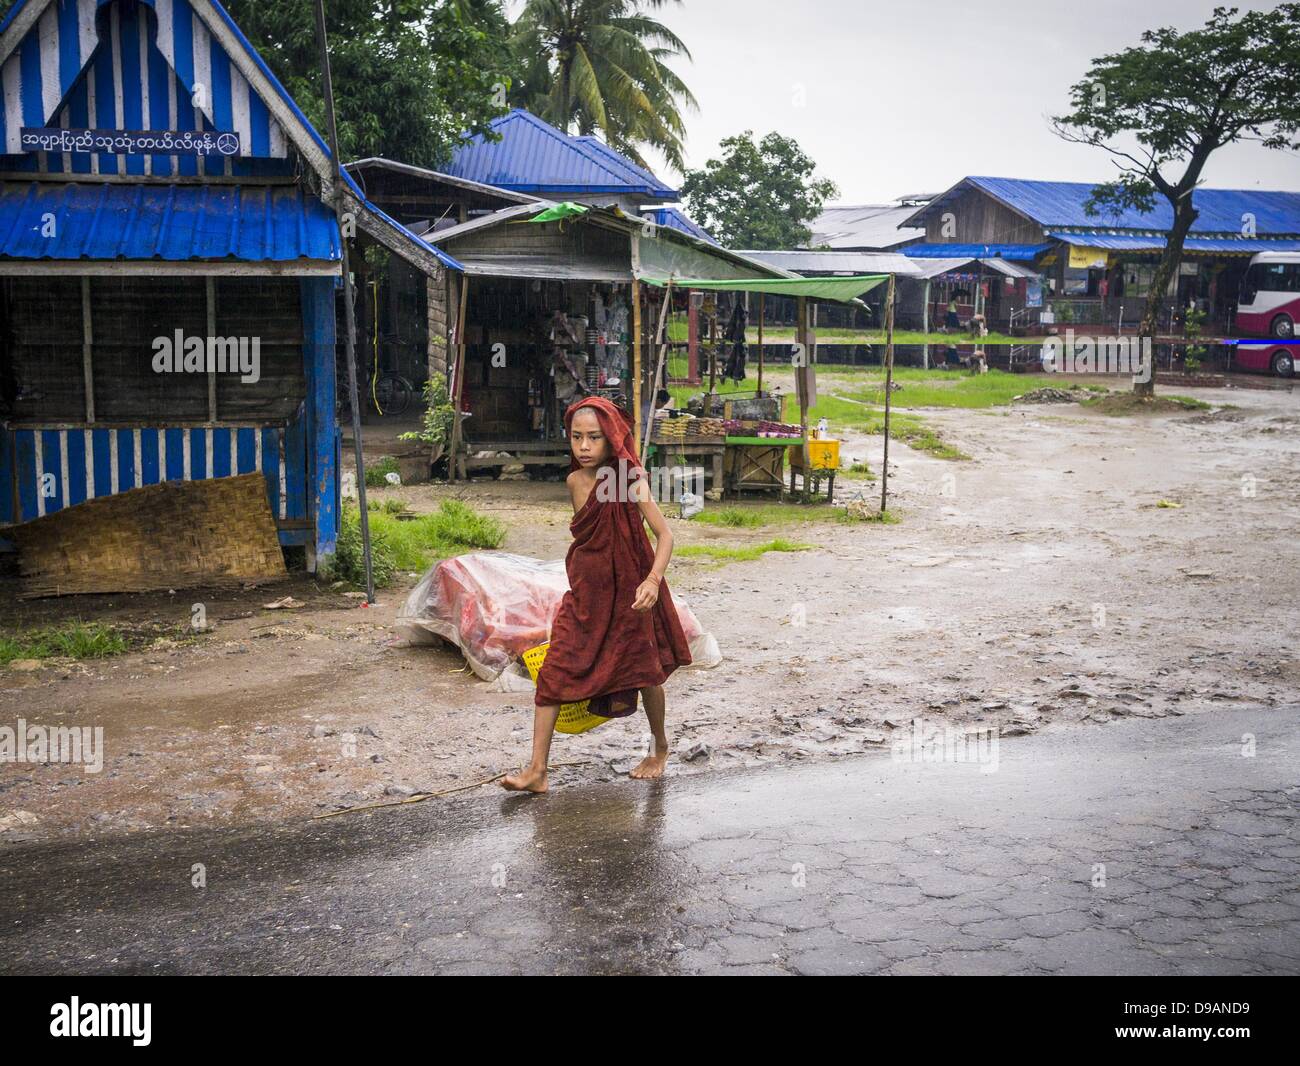 June 14, 2013 - Samalauk, Ayeyarwady, Union of Myanmar - A Buddhist novice walks through the rain along Highway 5 in Samalauk, Ayeyarwady, in the Irrawaddy delta region of Myanmar. Most Burmese men join the clergy at least once in the lives, sometimes for just a few weeks, other times for a lifetime commitment. This region of Myanmar was devastated by cyclone Nargis in 2008 but daily life has resumed and it is now a leading rice producing region. (Credit Image: © Jack Kurtz/ZUMAPRESS.com) Stock Photo